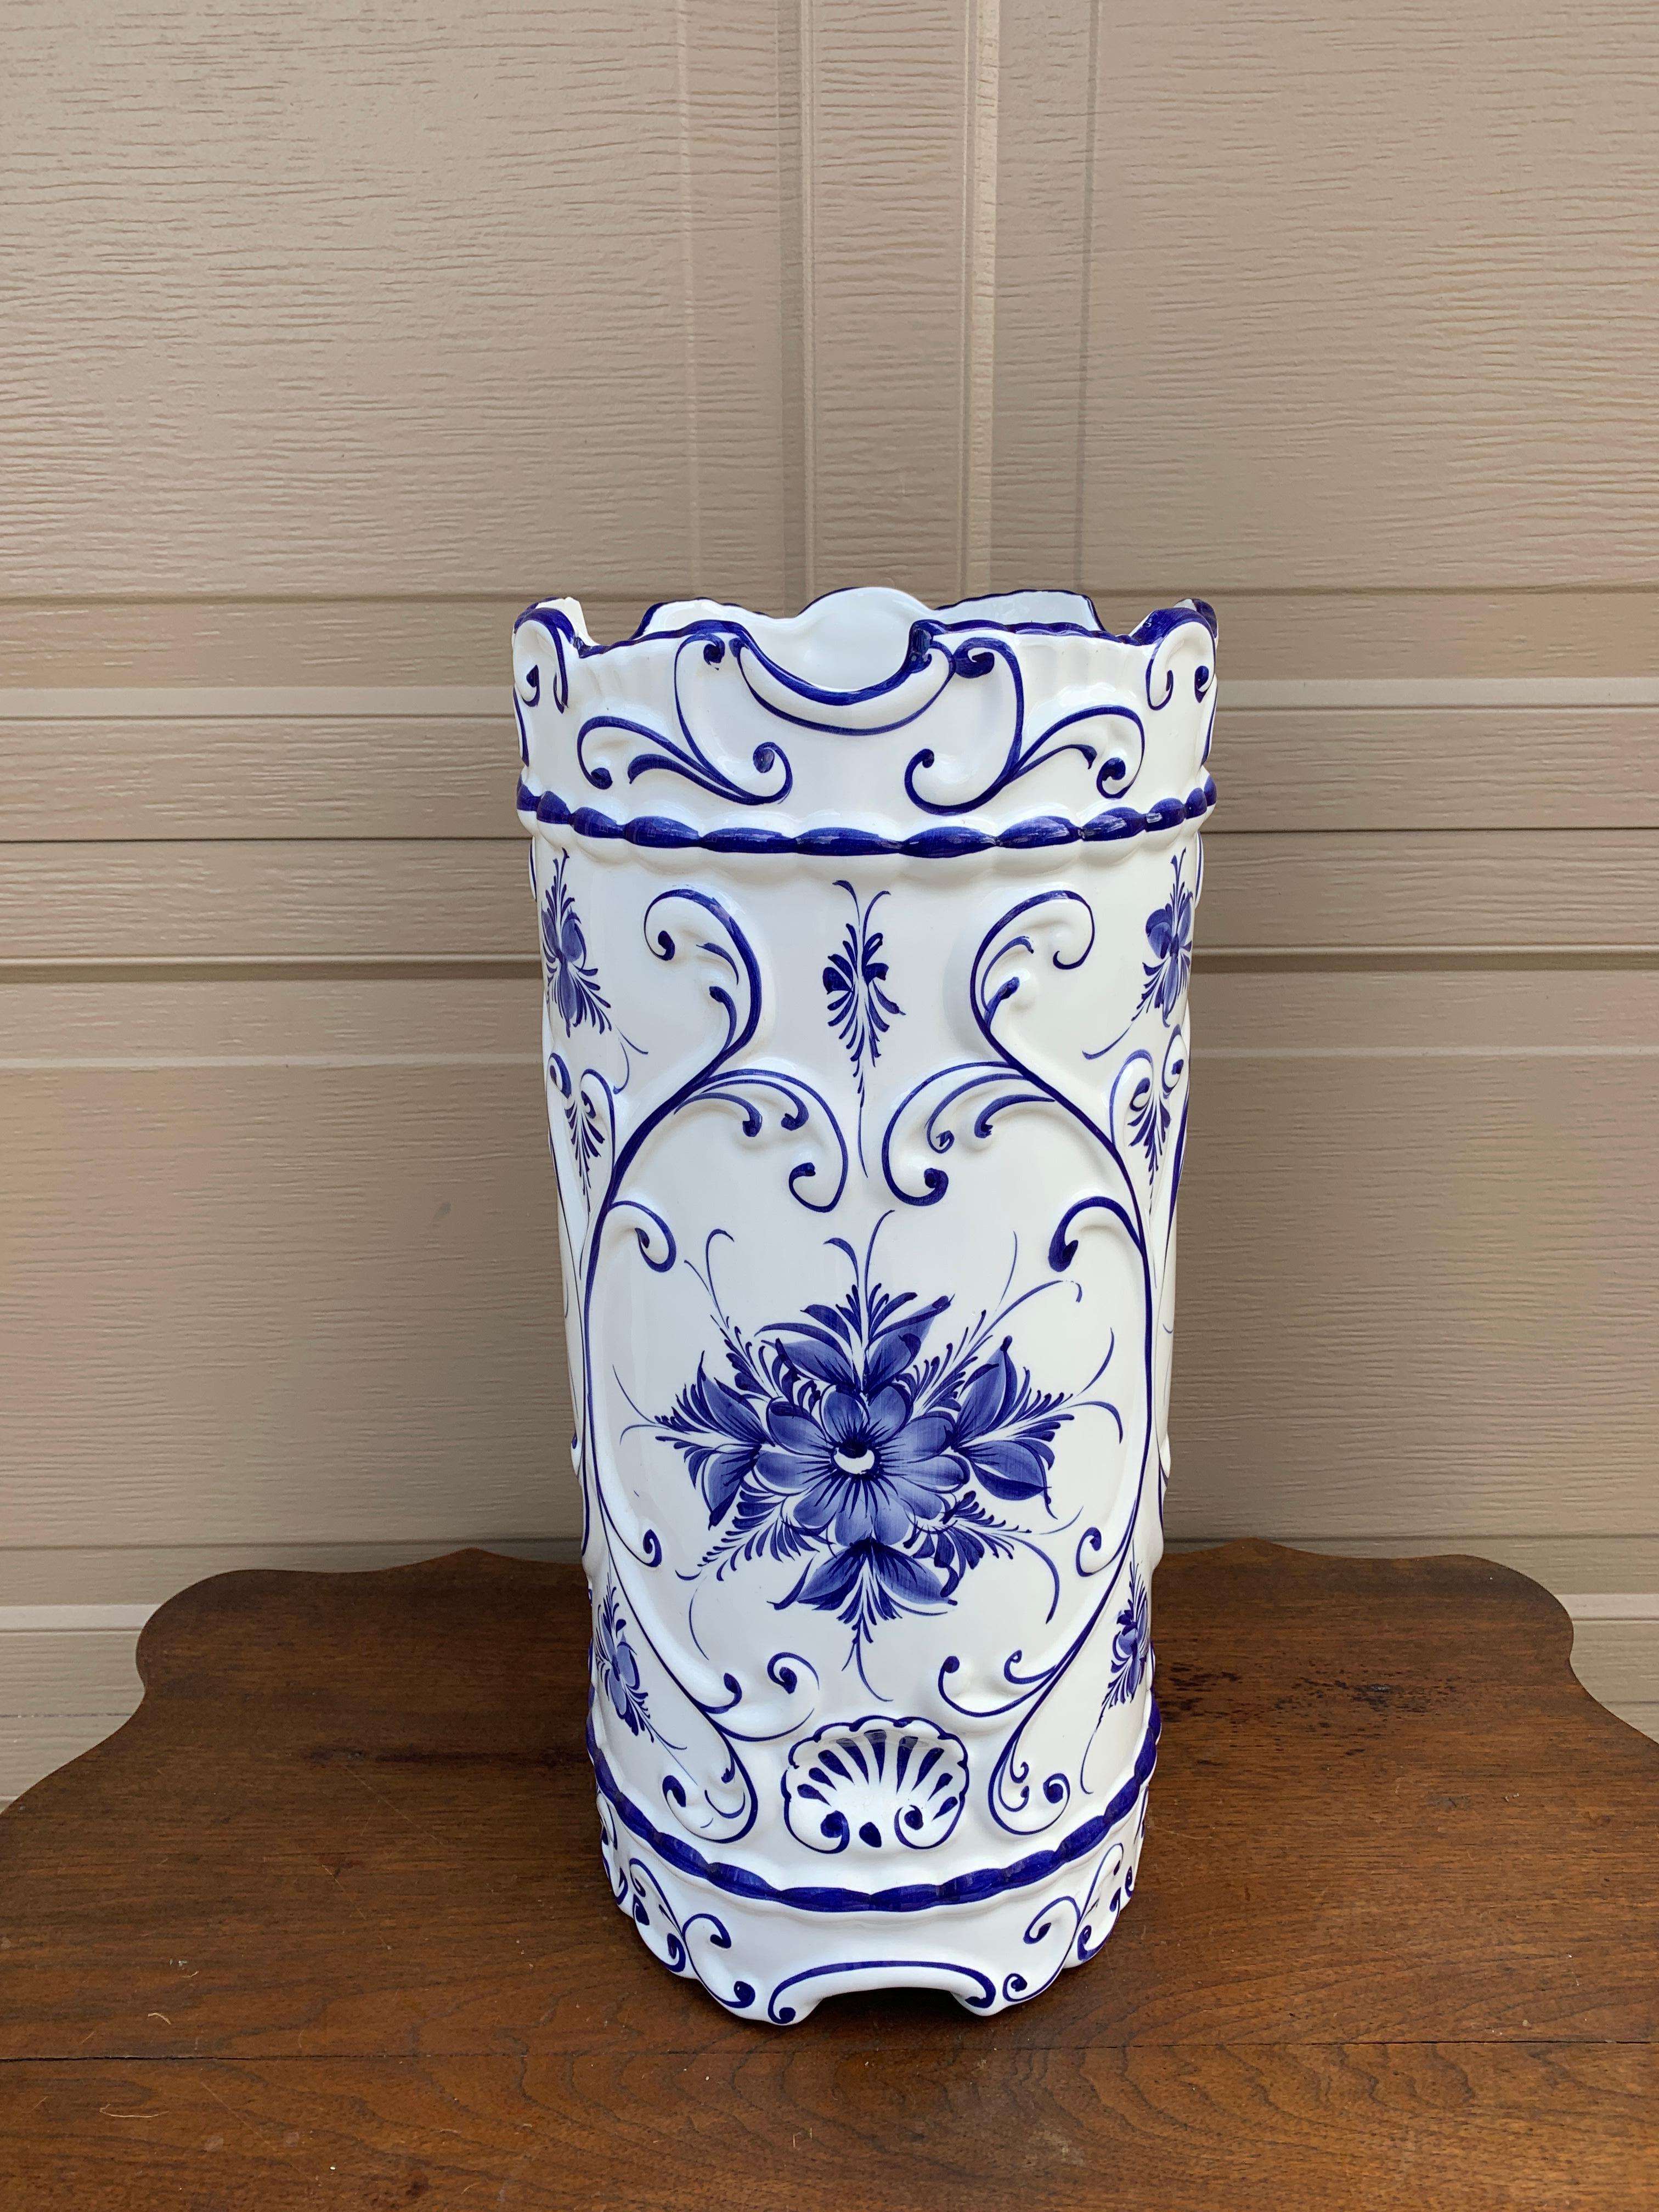 A gorgeous blue and white porcelain umbrella or cane stand with a Delft style hand-painted design

Portugal, Circa 1980s

Measures: 9